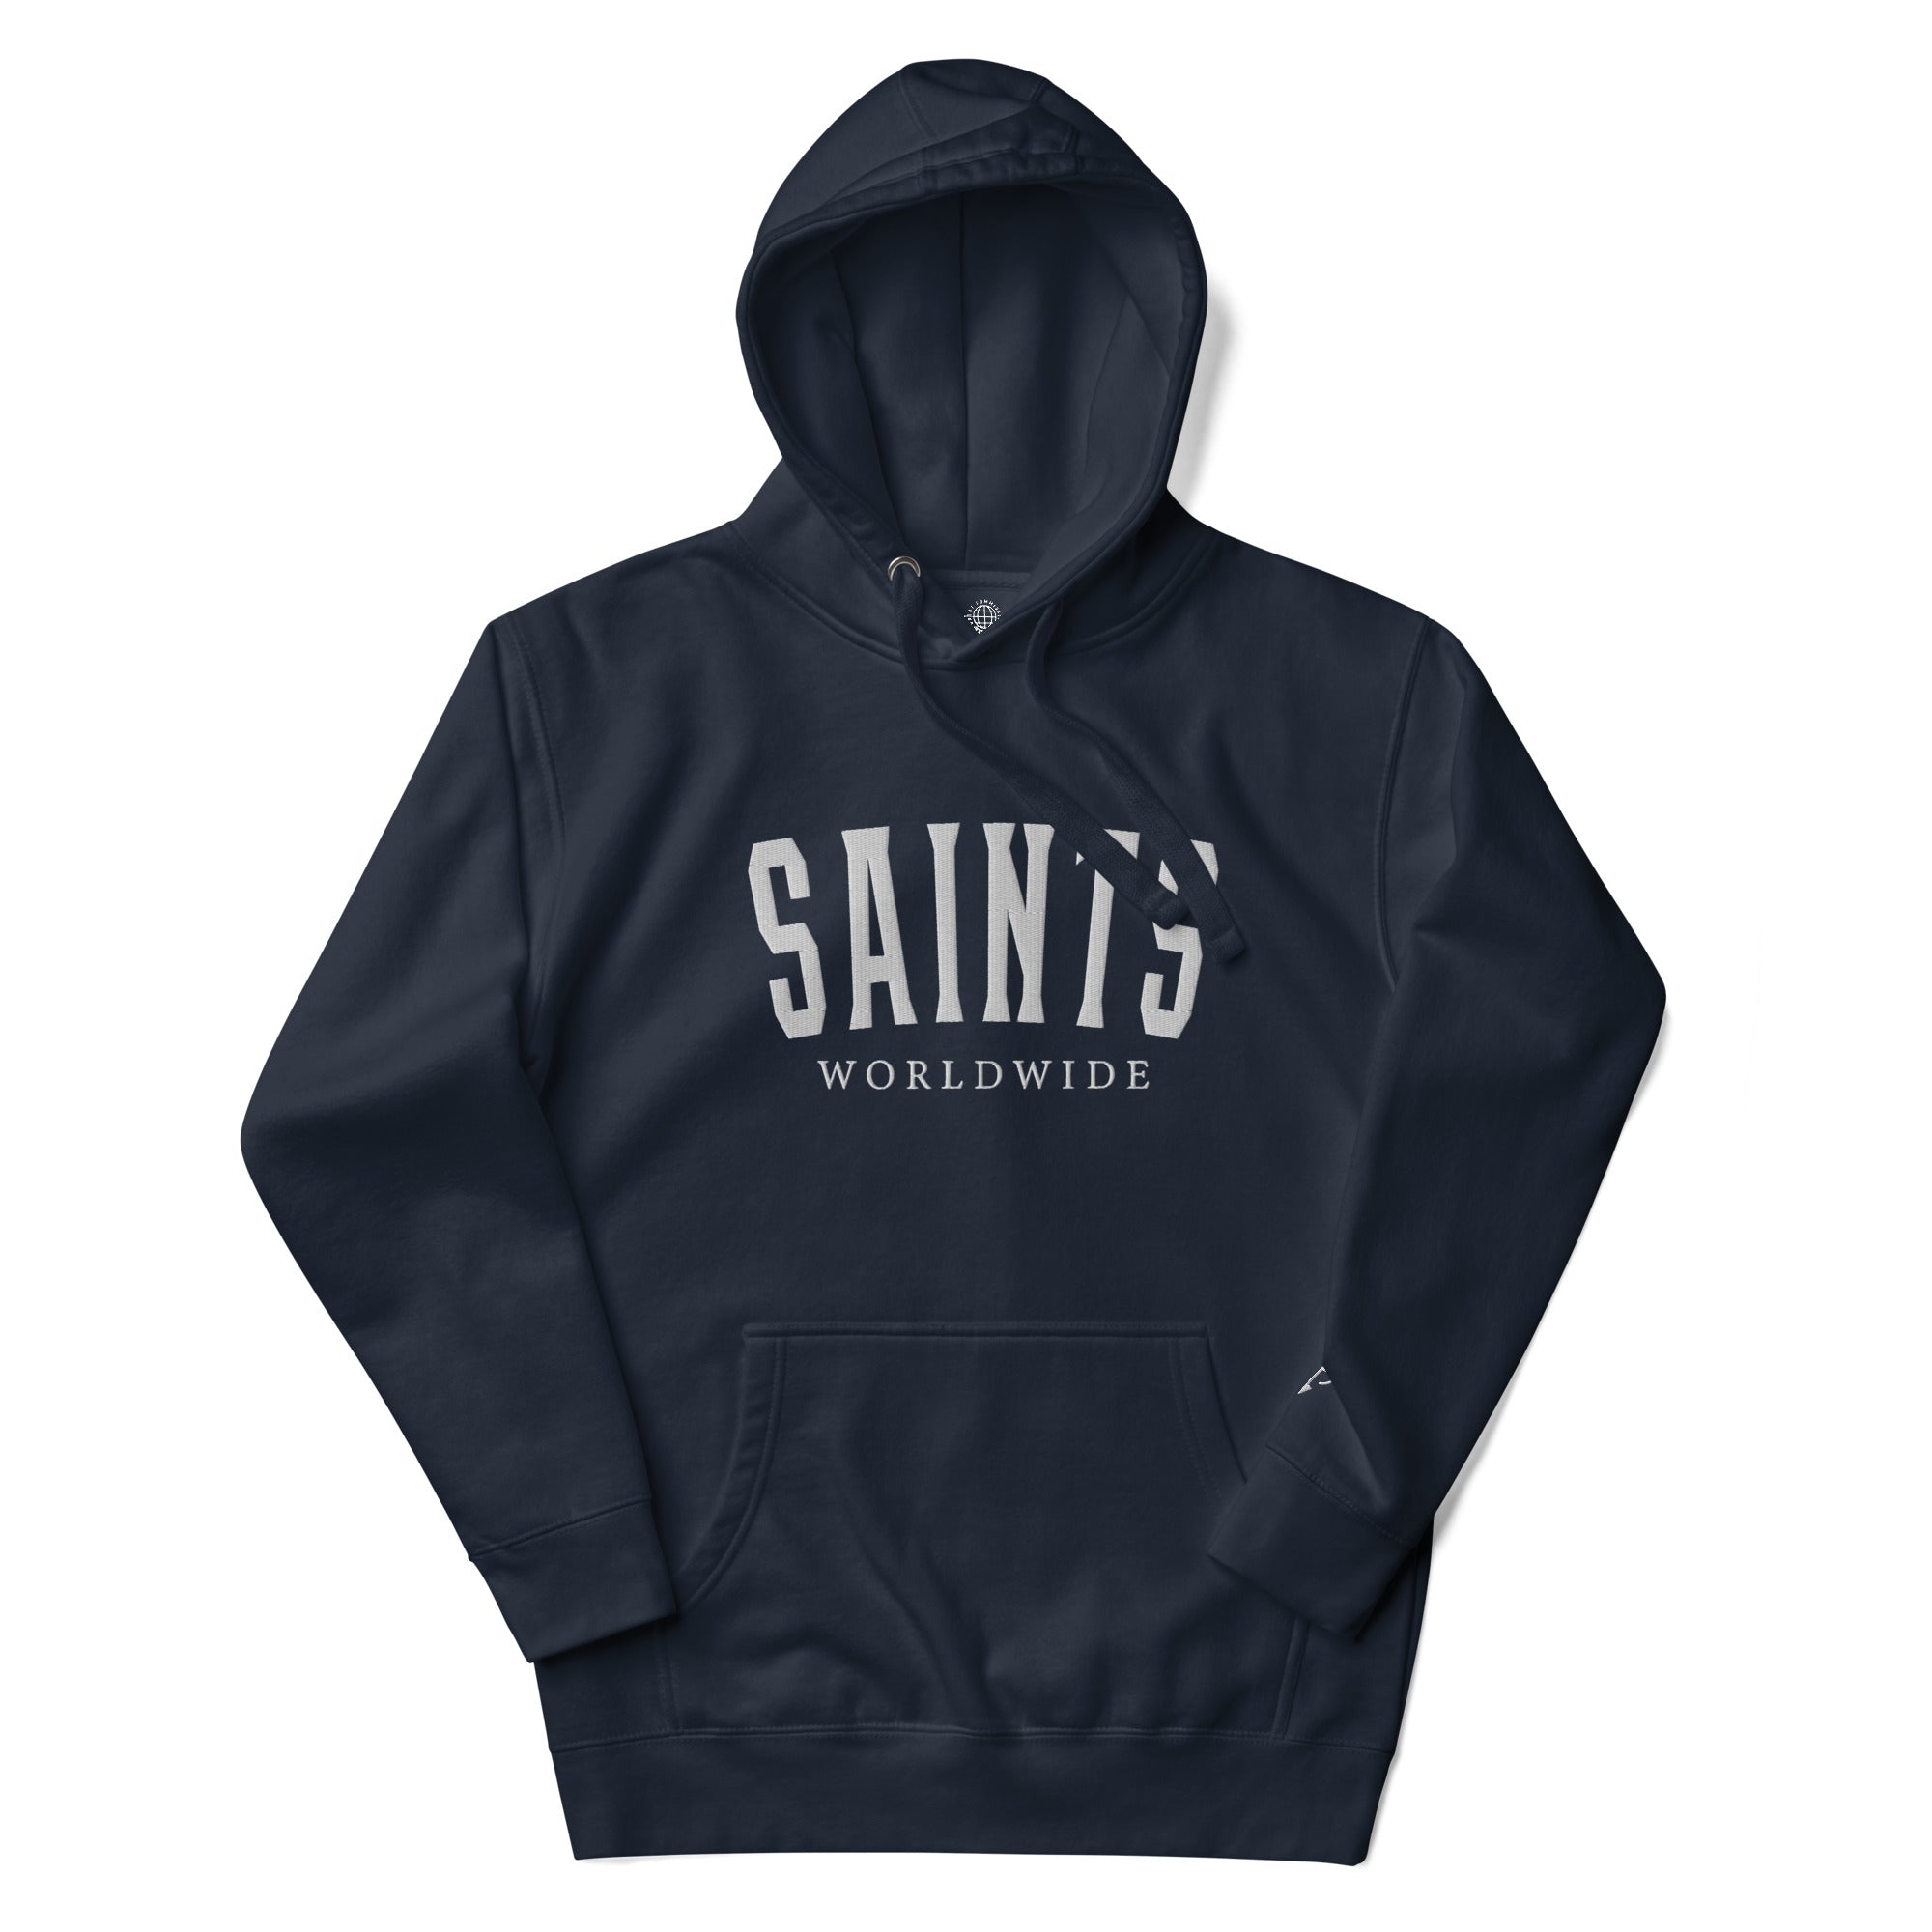 SAINTS WORLDWIDE Embroidered Hoodie - Navy Blue - Great Commission Company